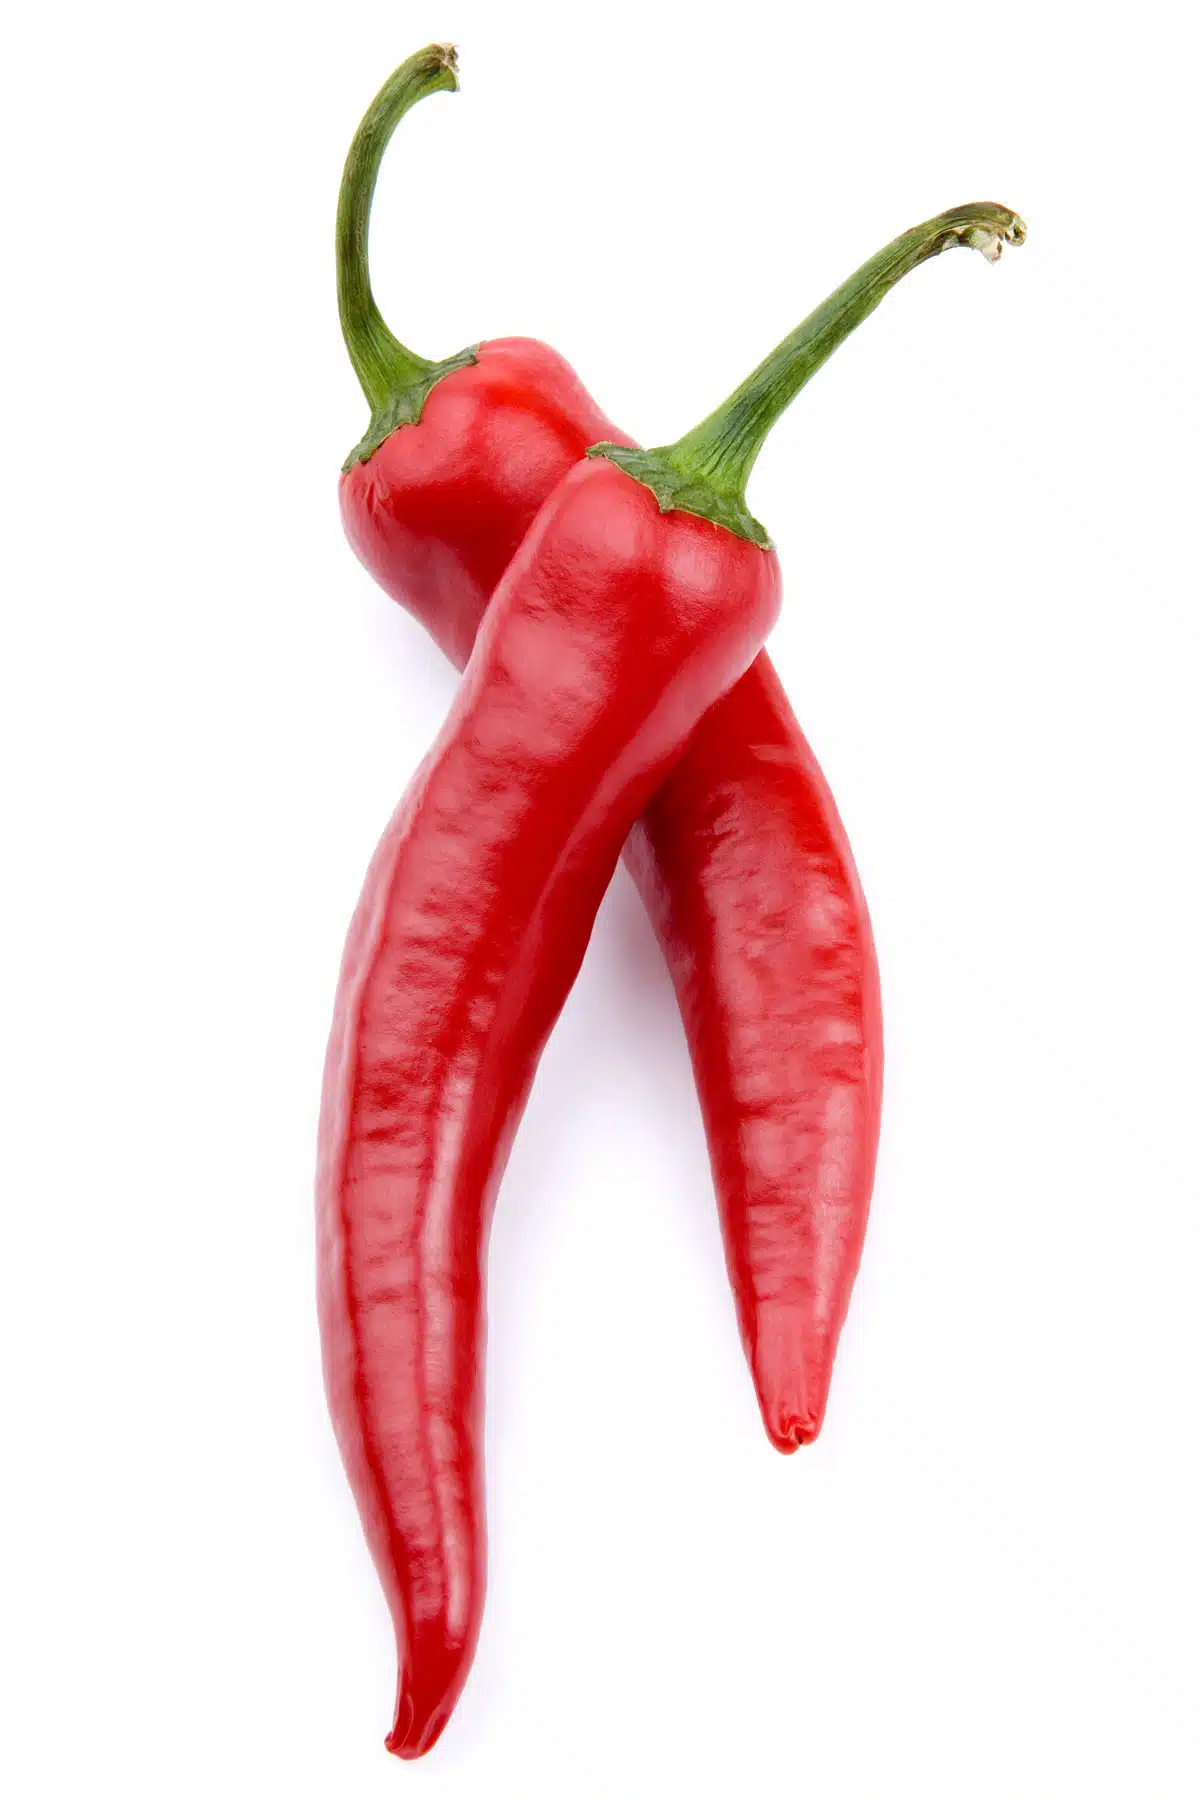 two red chili peppers sit on a white surface